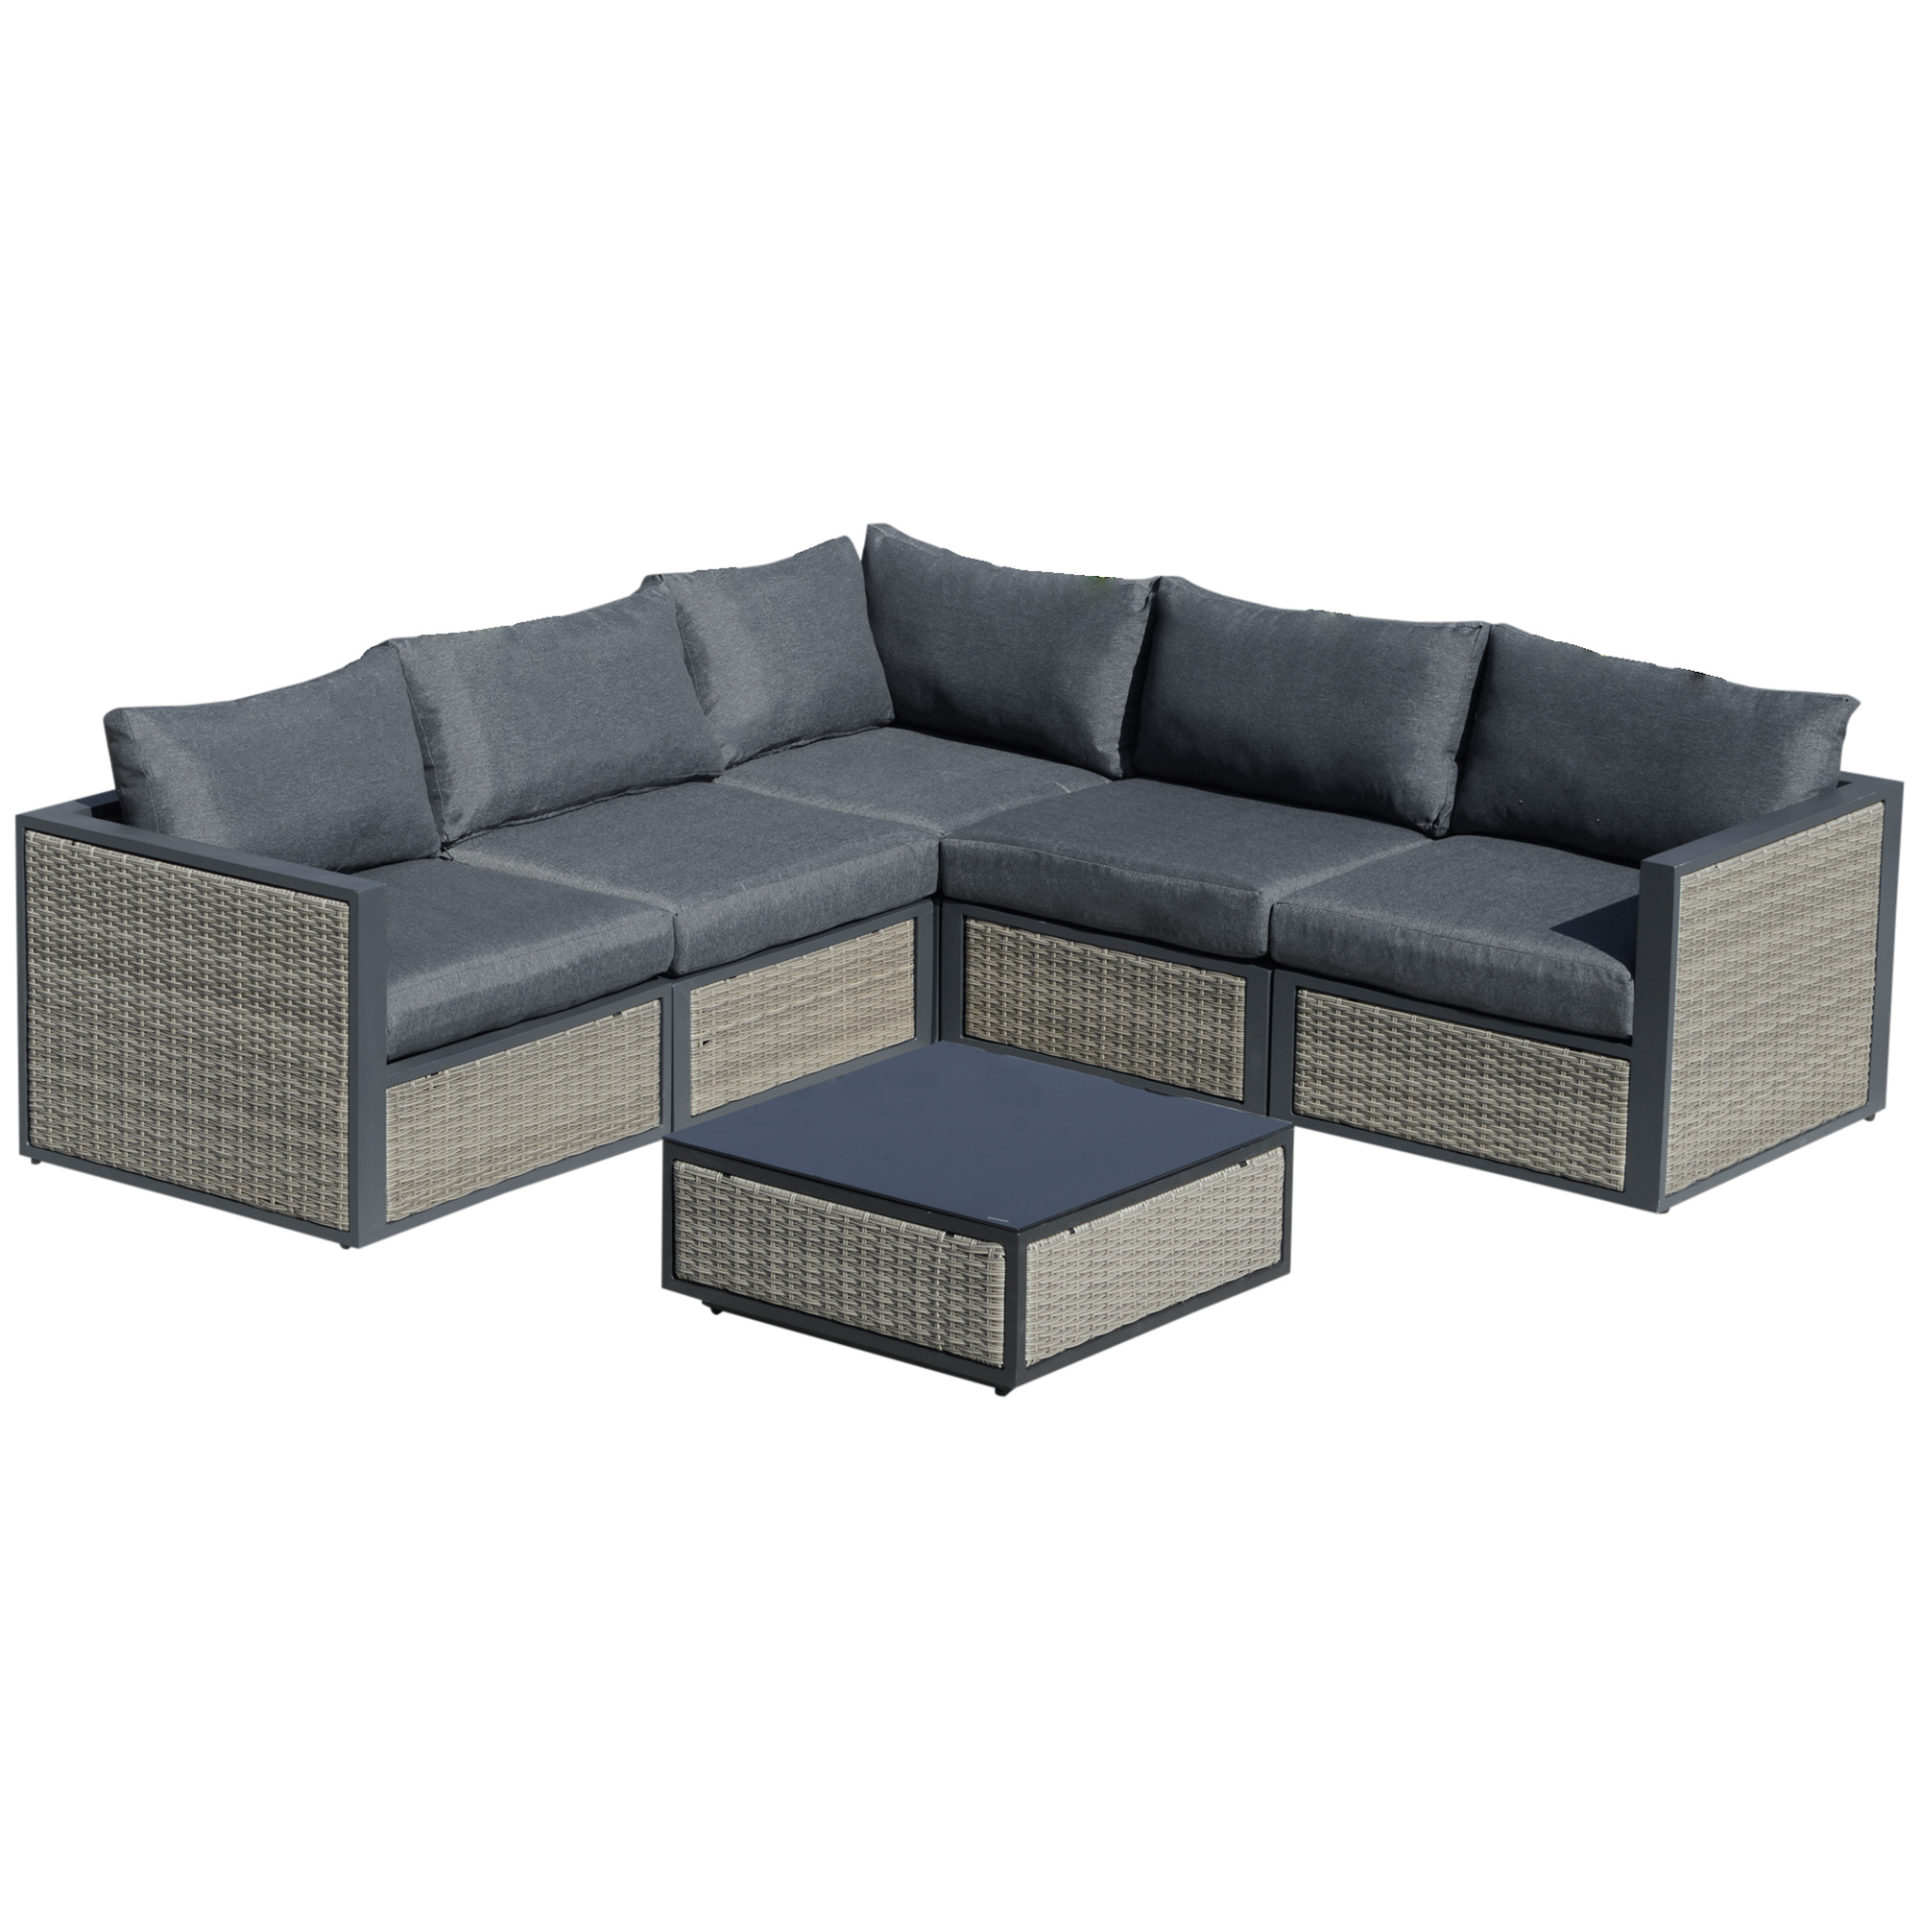 Grey - 6-Piece Outdoor Cozy Wicker Rattan Design Sofa With Coffee Table & Soft Padded Cushions